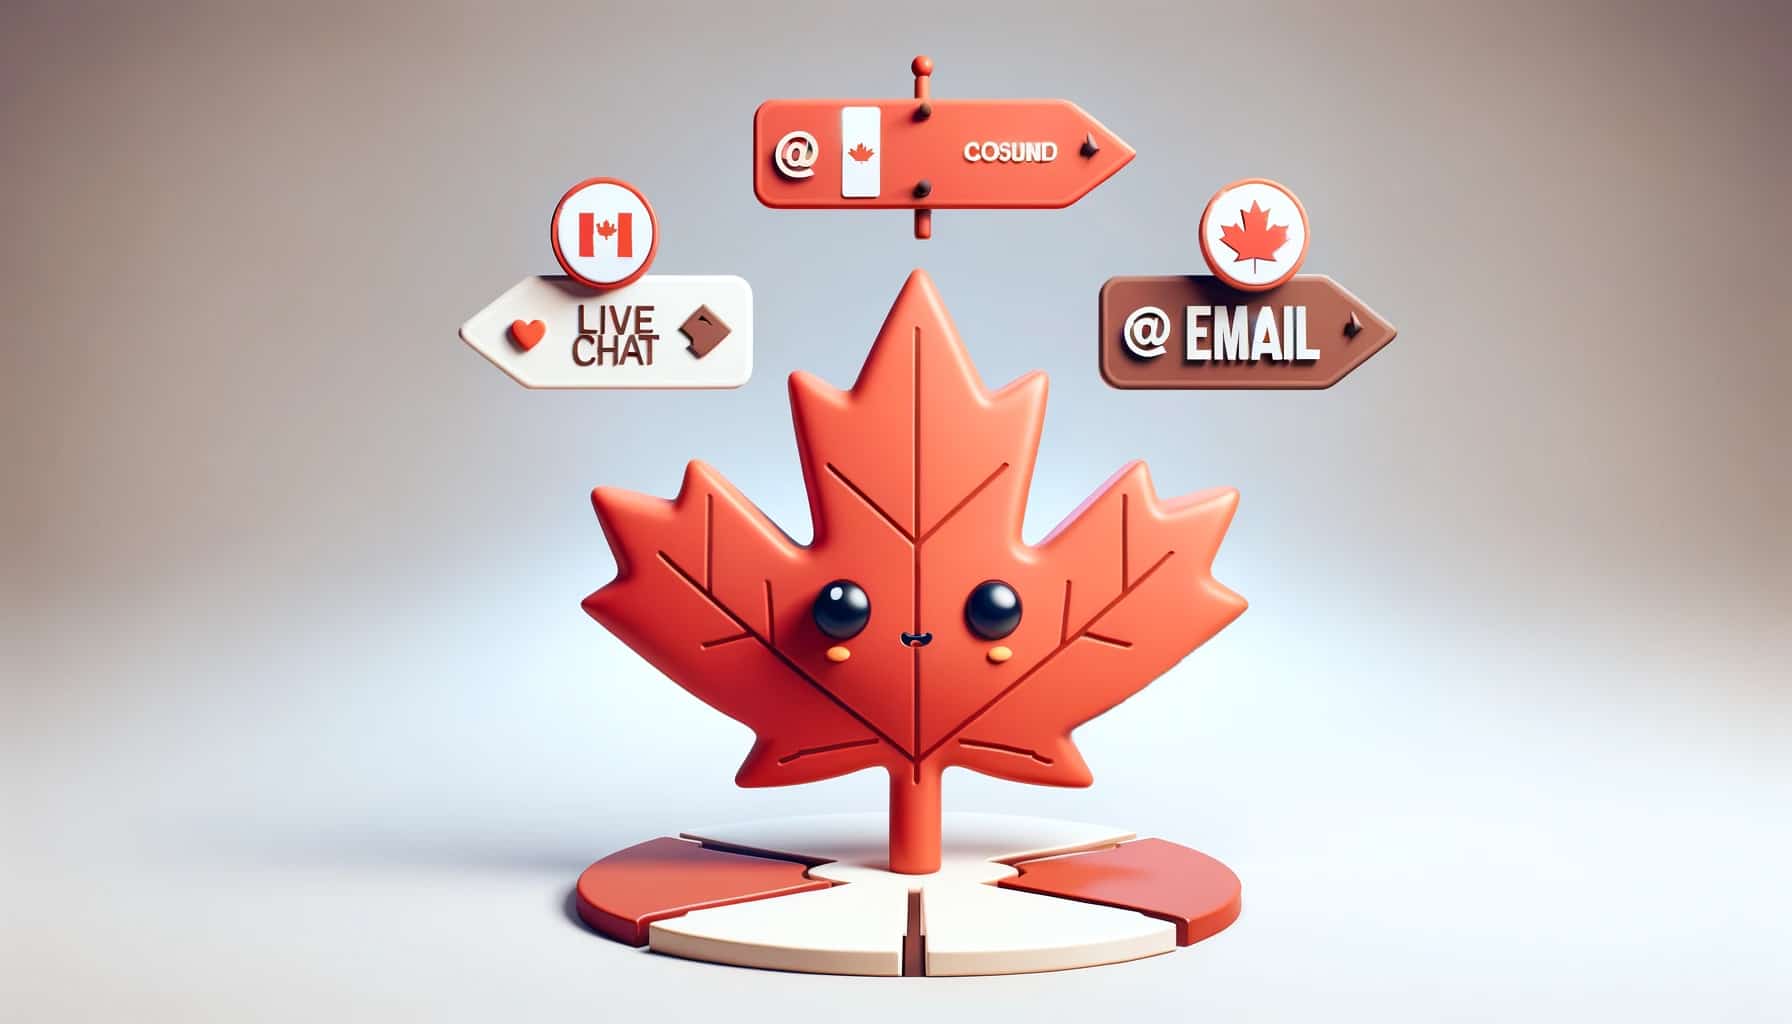 The iconic symbol of Canada is represented by a small red maple leaf accompanied by a sign that bears the country's name.